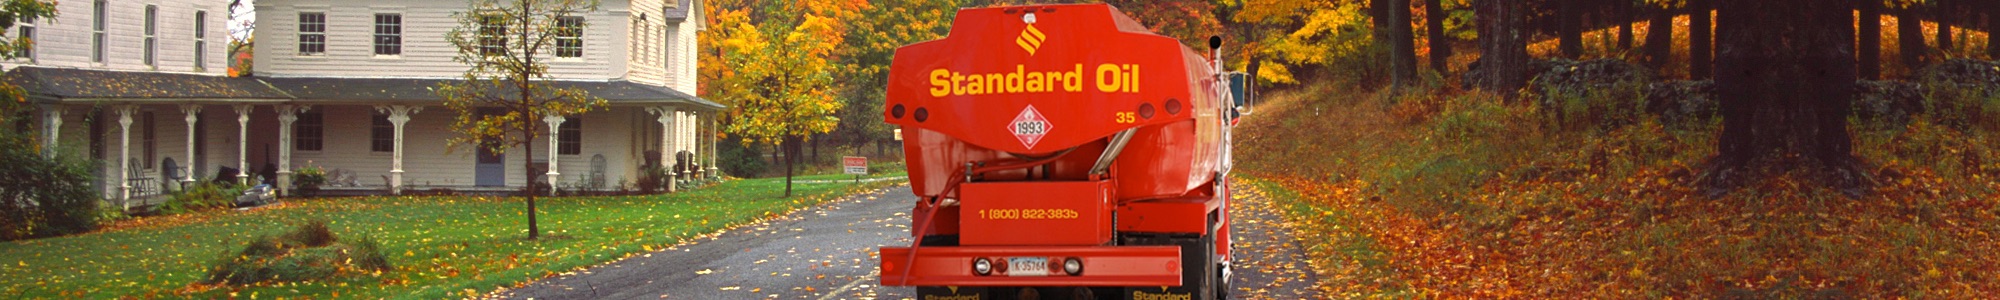 Heating oil prices in Connecticut